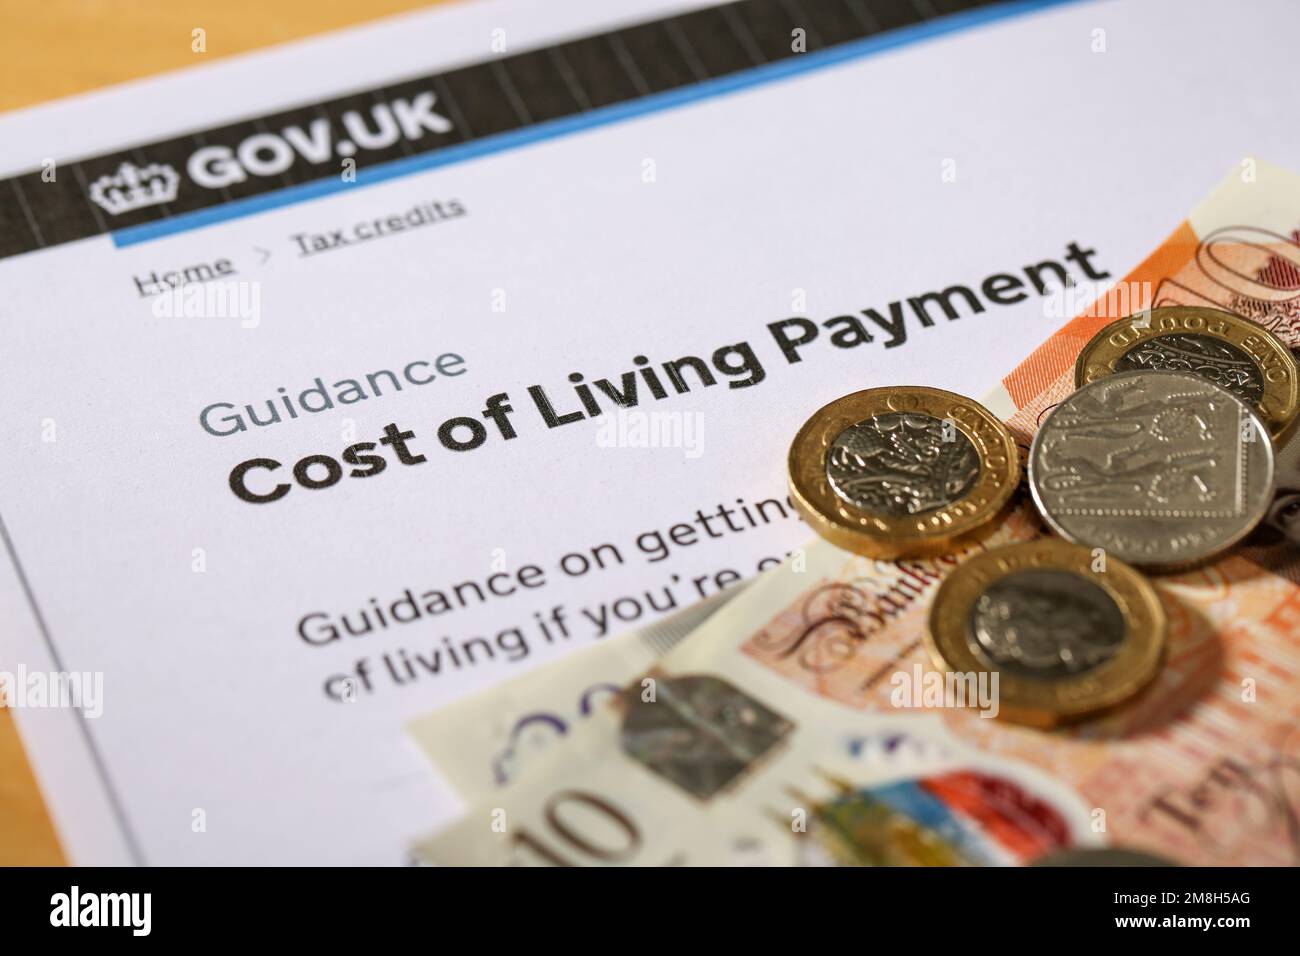 Cost of Living crisis in the UK. UK Government cost of living payment to support people with certain benifits or tax credits. Stock Photo